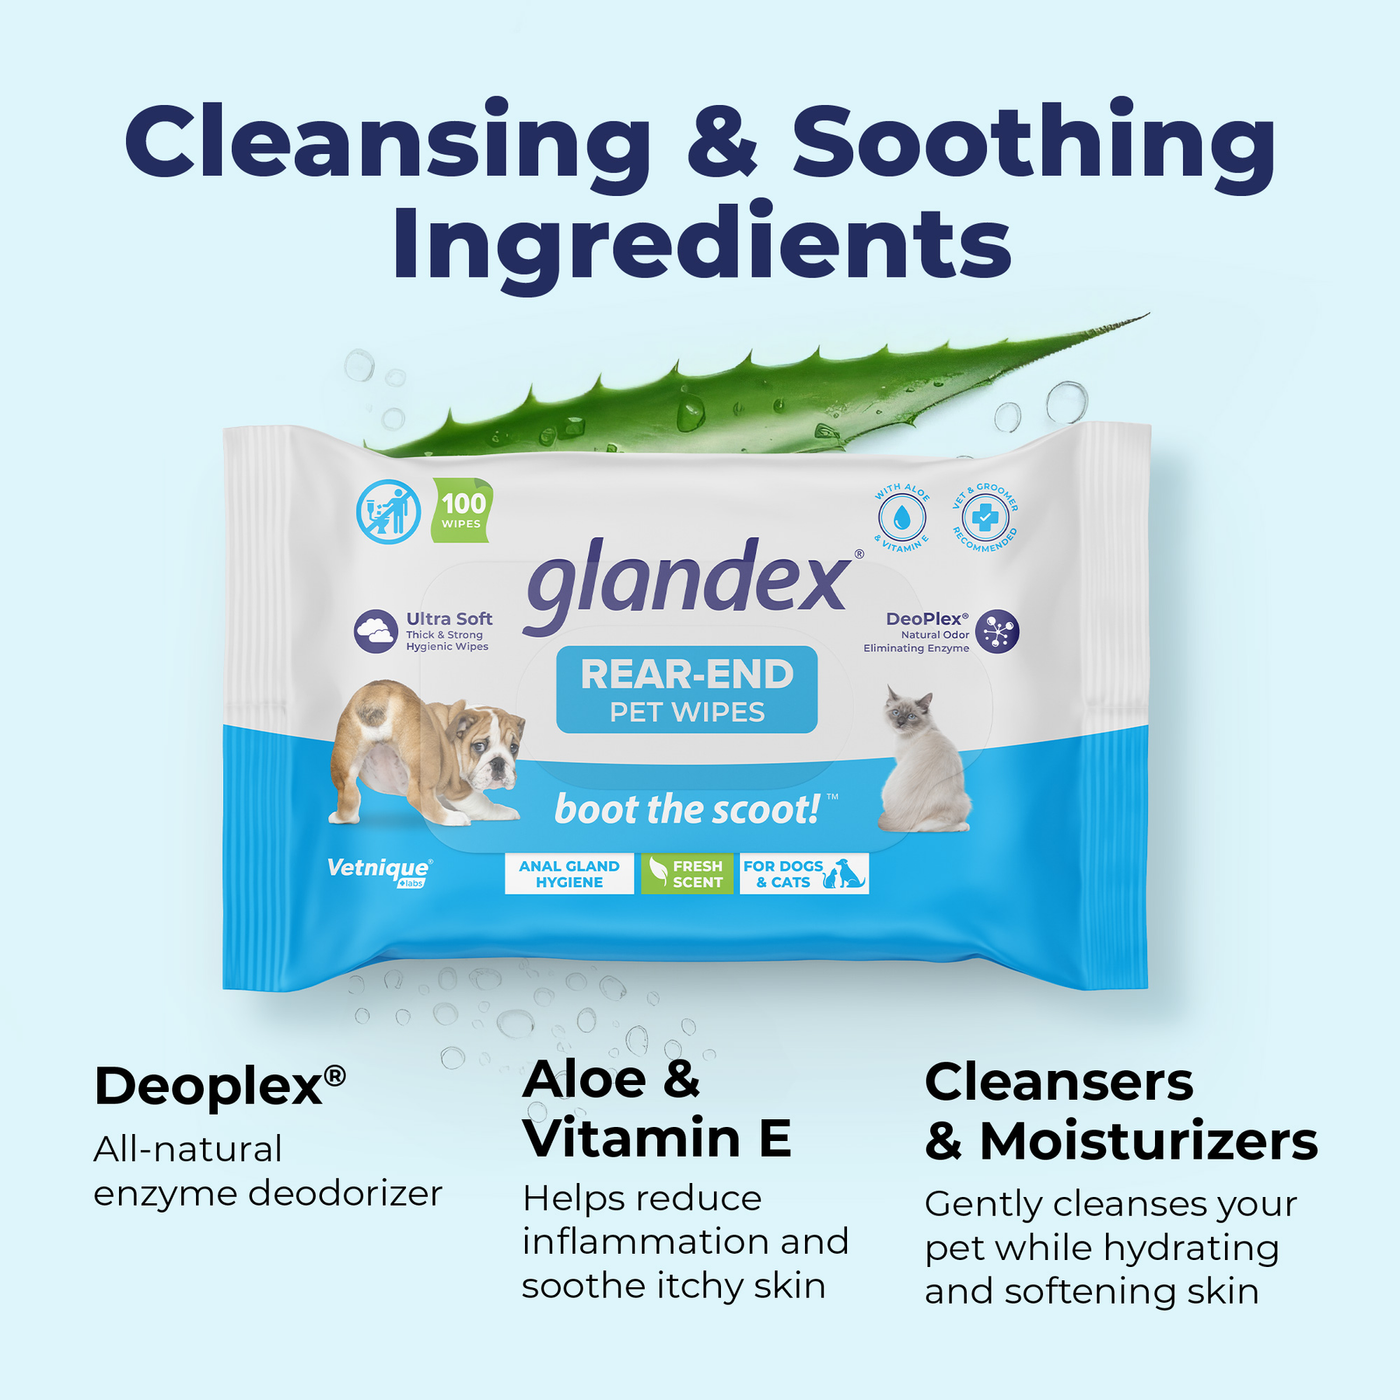 Cleansing and Soothing Ingredients